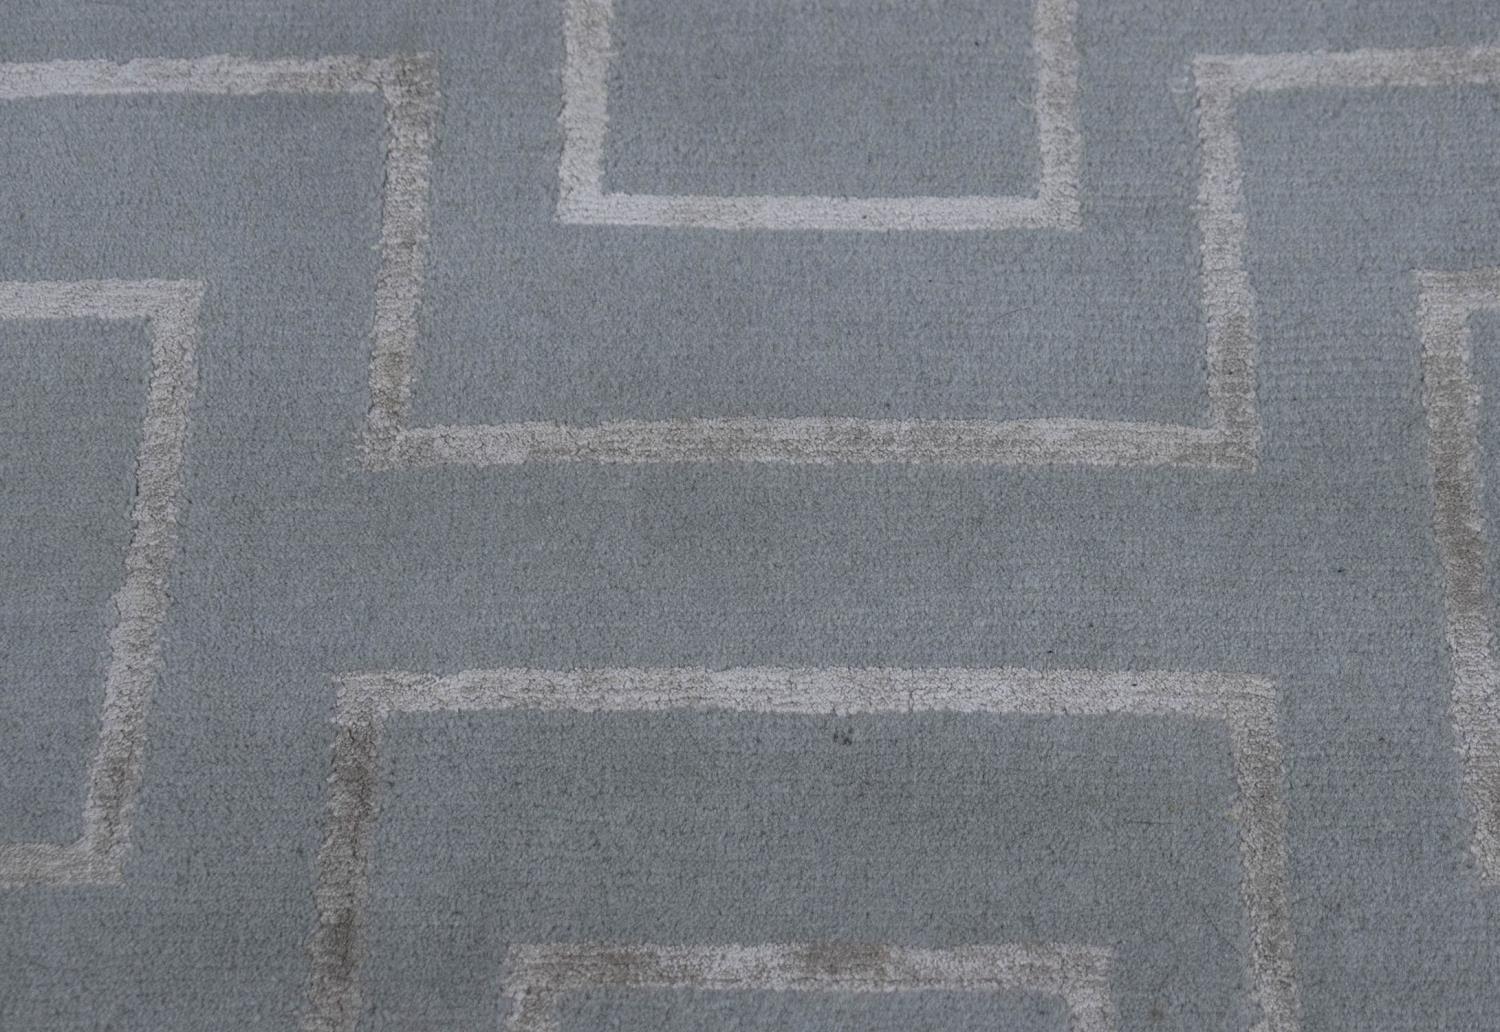 CONTEMPORARY RUG COMPANY INSPIRED CARPET, 300cm X 240cm, Art Deco design wool and silk. - Image 2 of 5